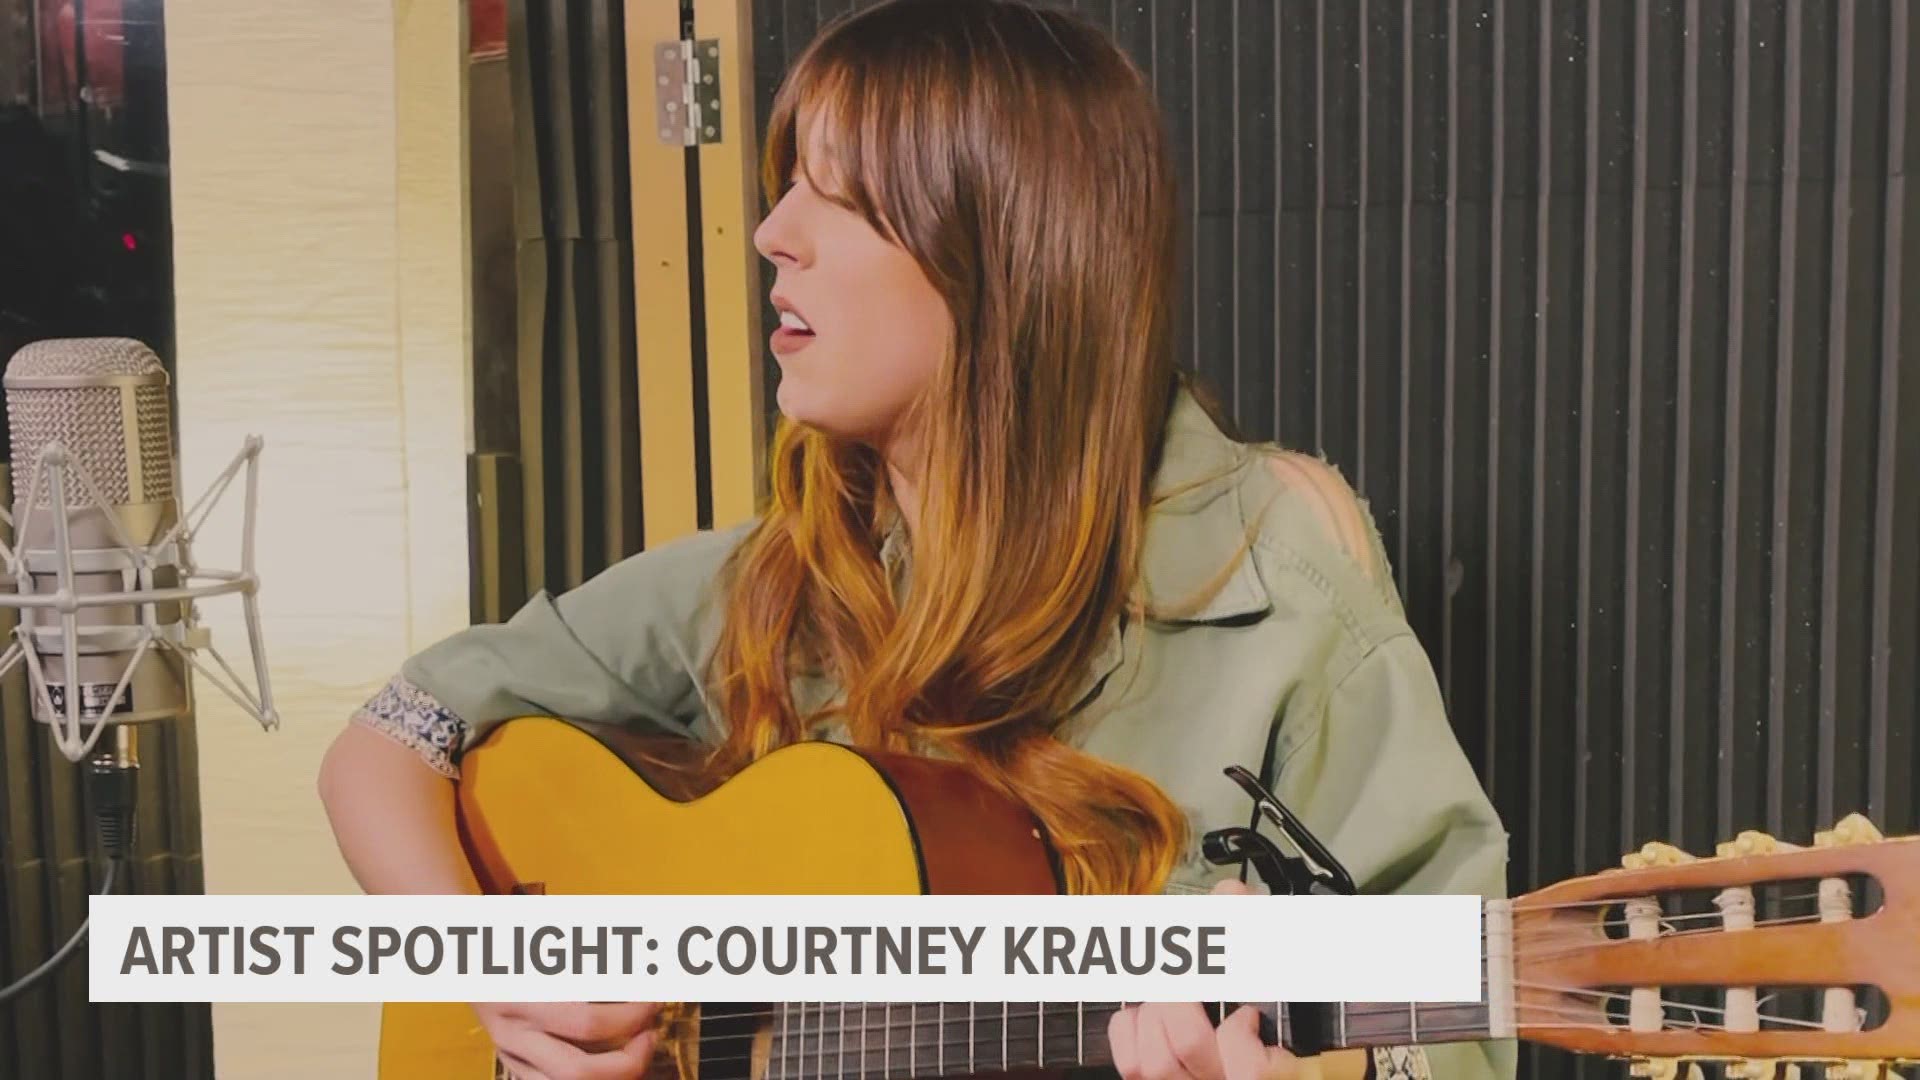 The lyrics, the voice; Courtney Krause is a charming entertainer and we're lucky enough to feature her. Learn more about her work at www.courtneykrausemusic.com!